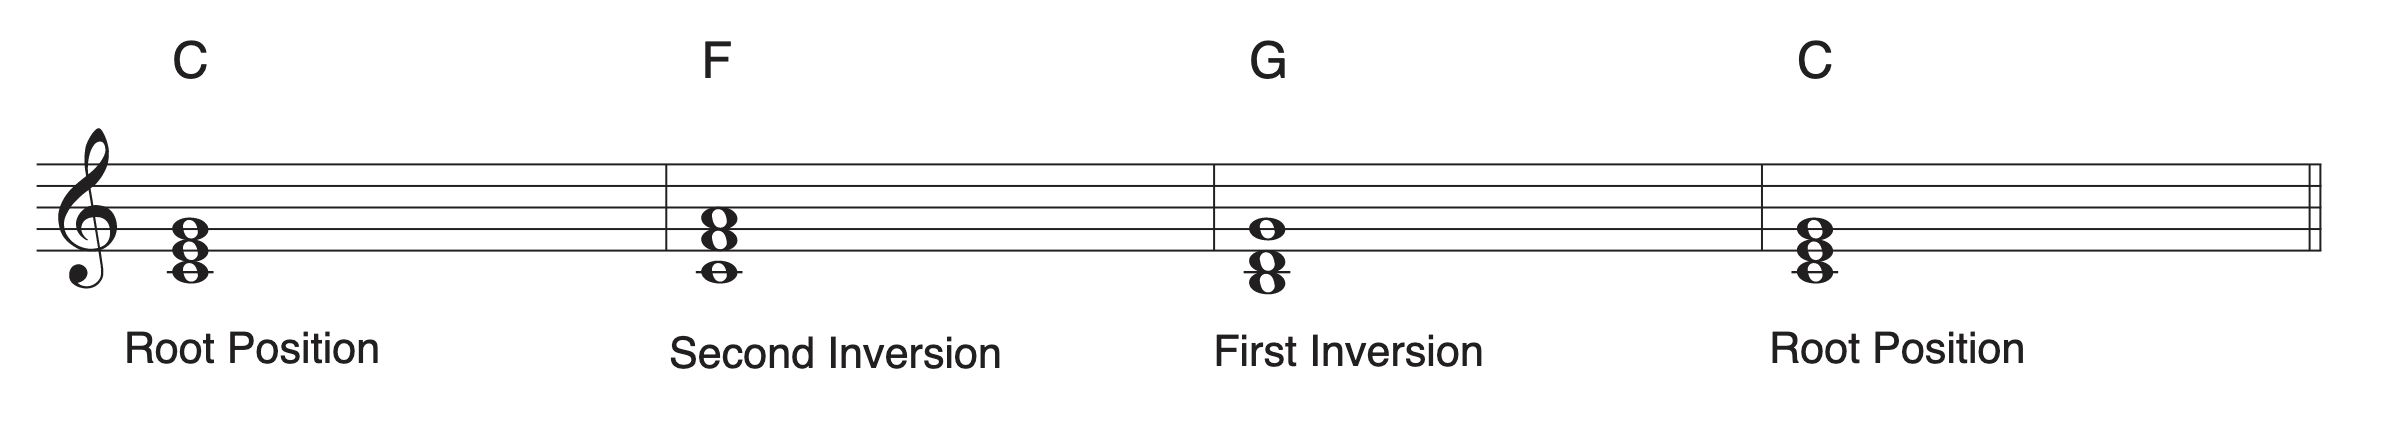 This music notation example shows that to help smooth voice leading F major and G major triads are inverted.